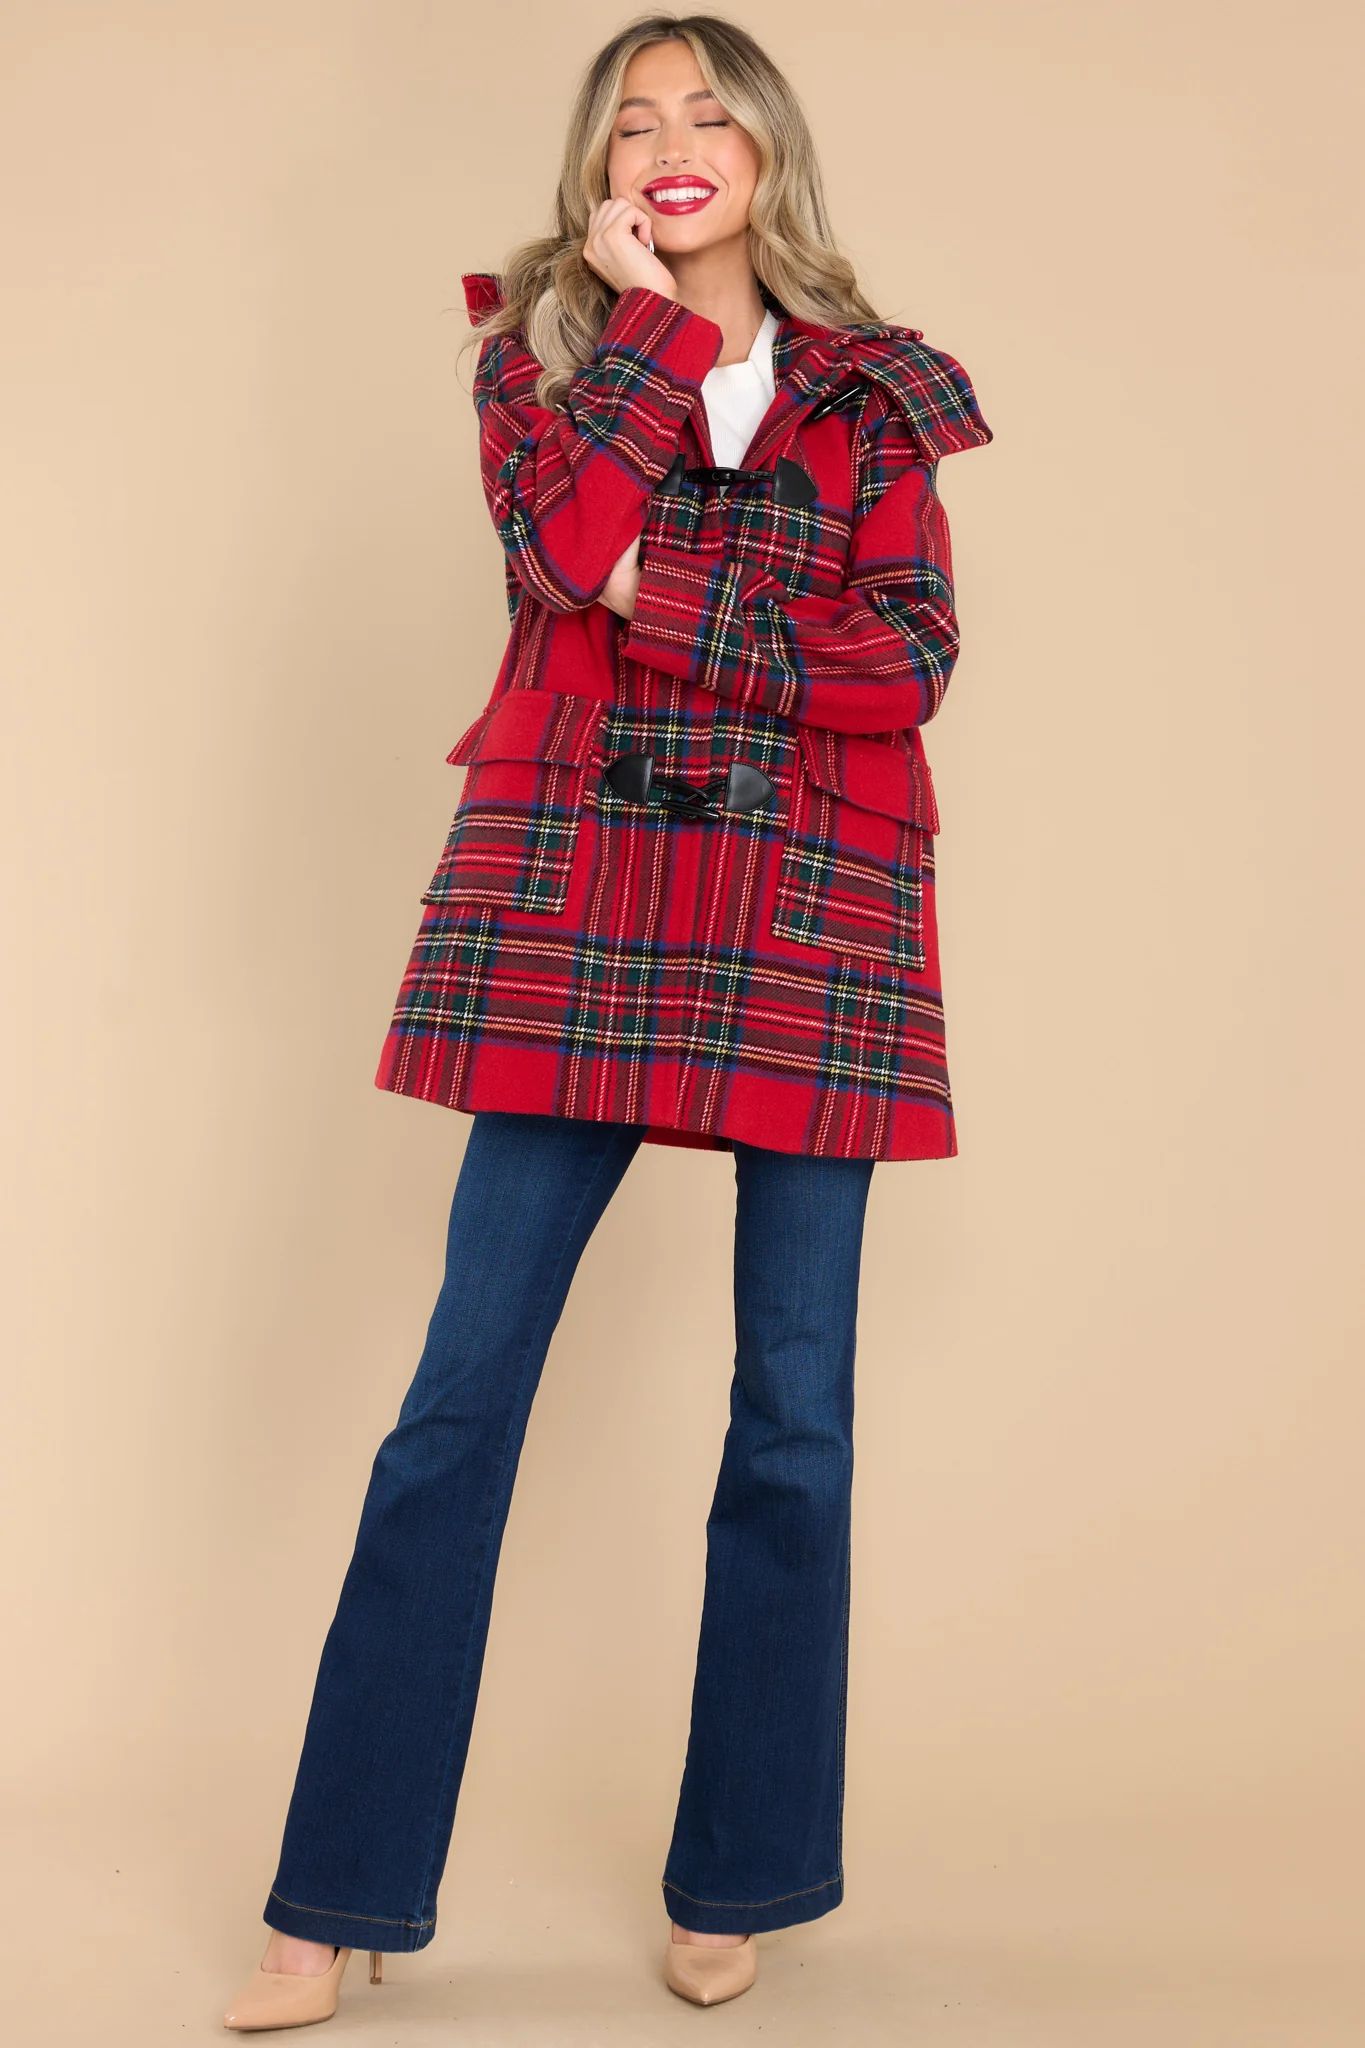 Perfectly In Season Red Plaid Coat | Red Dress 